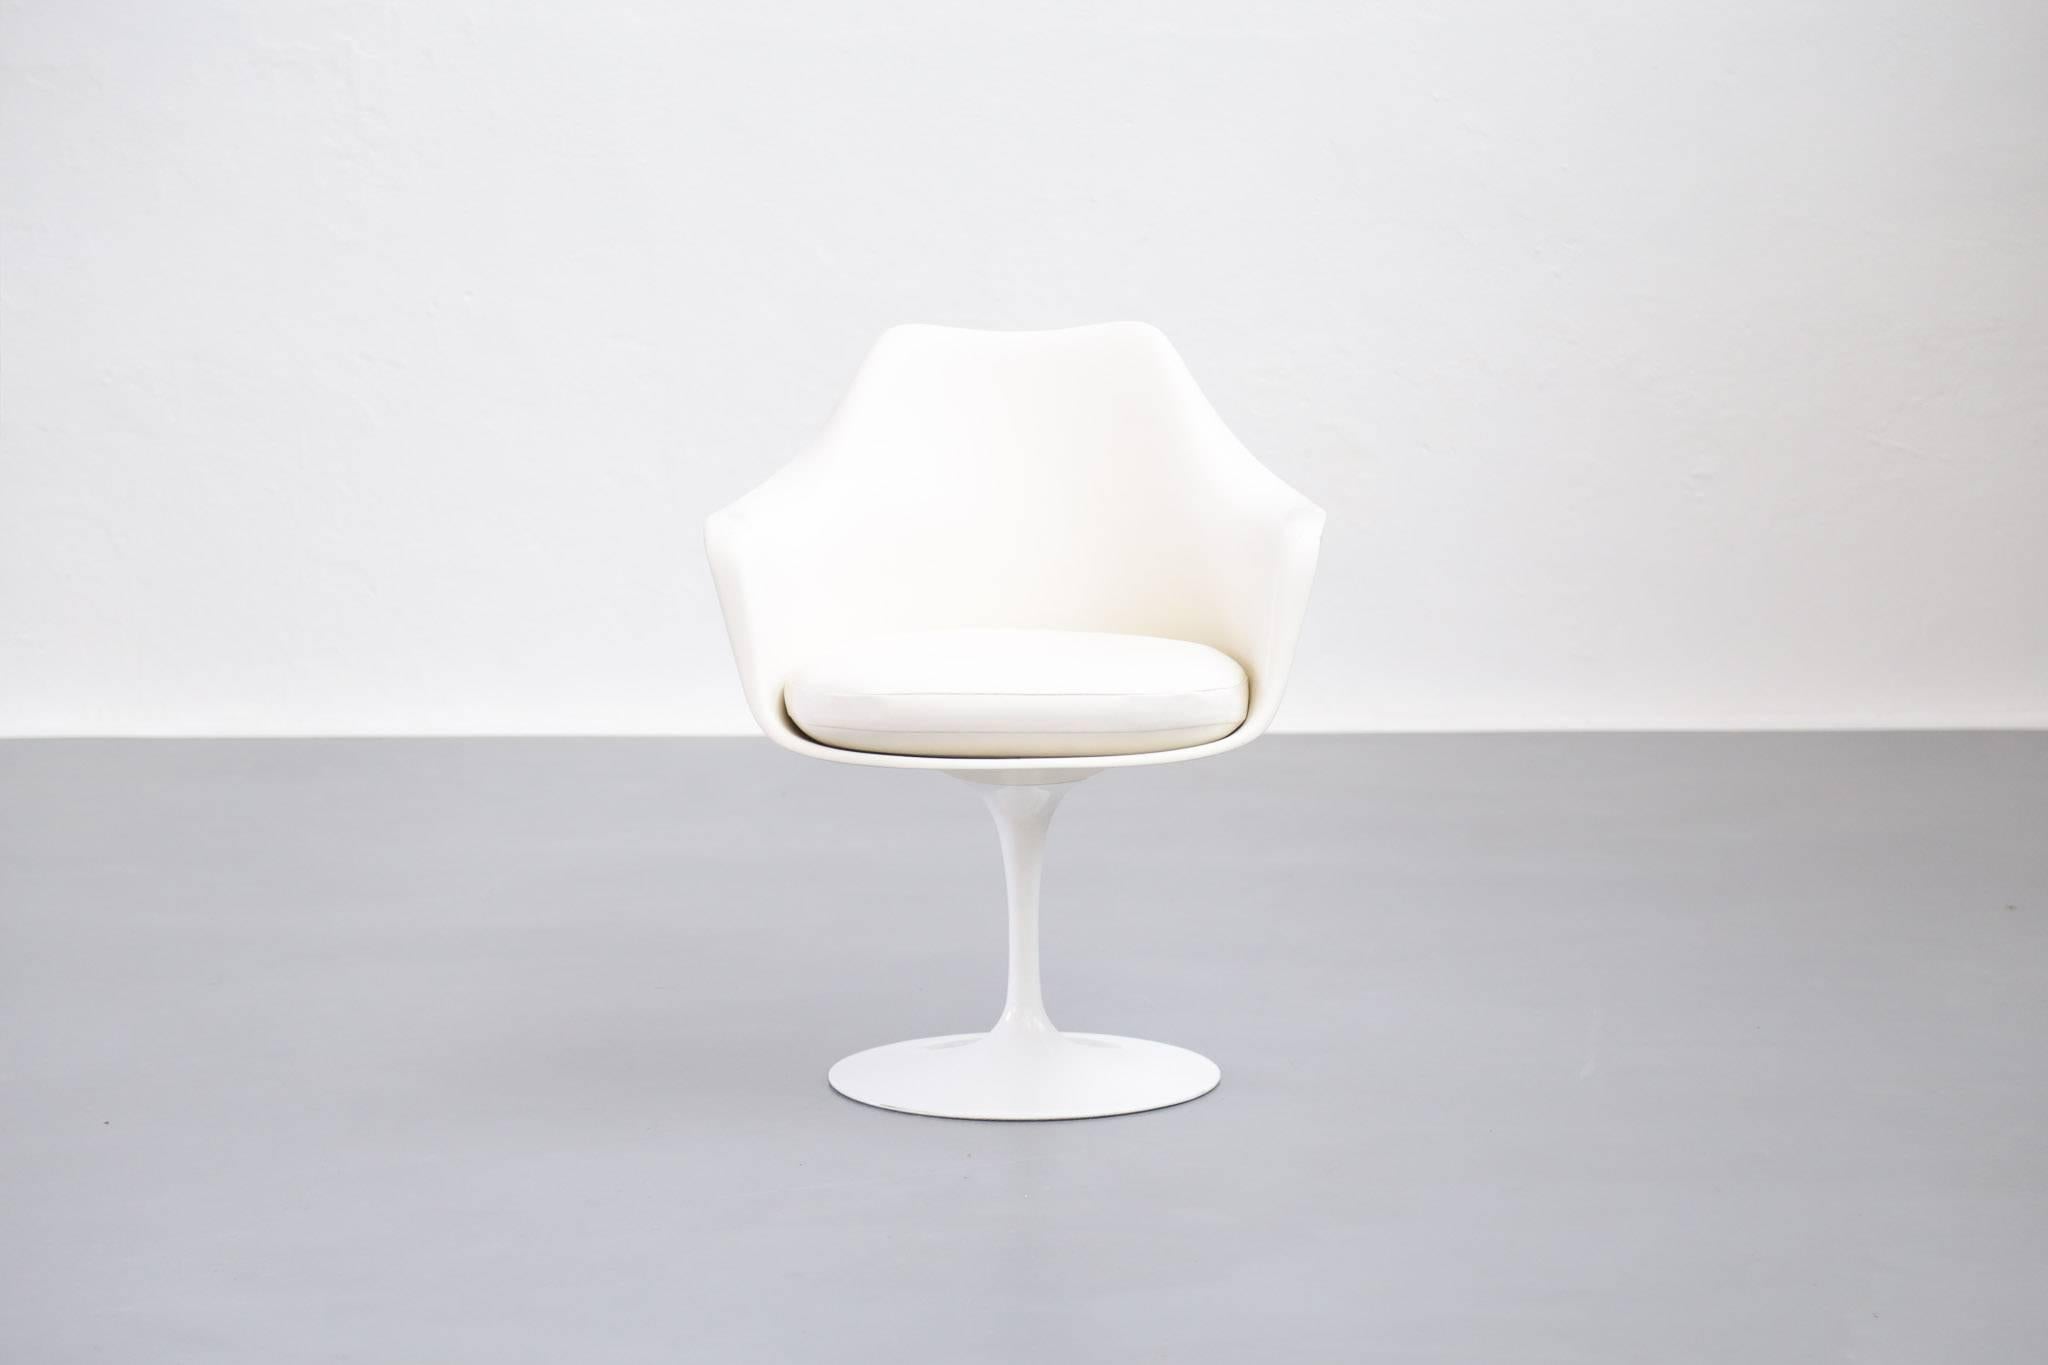 Armrest chair design by Eero Saarinen, Finland. Manufactured by Knoll
Famous graphic chair
The chair is in good condition with slight signs of usage. Made of white lacquered aluminium, the shell of glass fibre. The cushion is covered with the